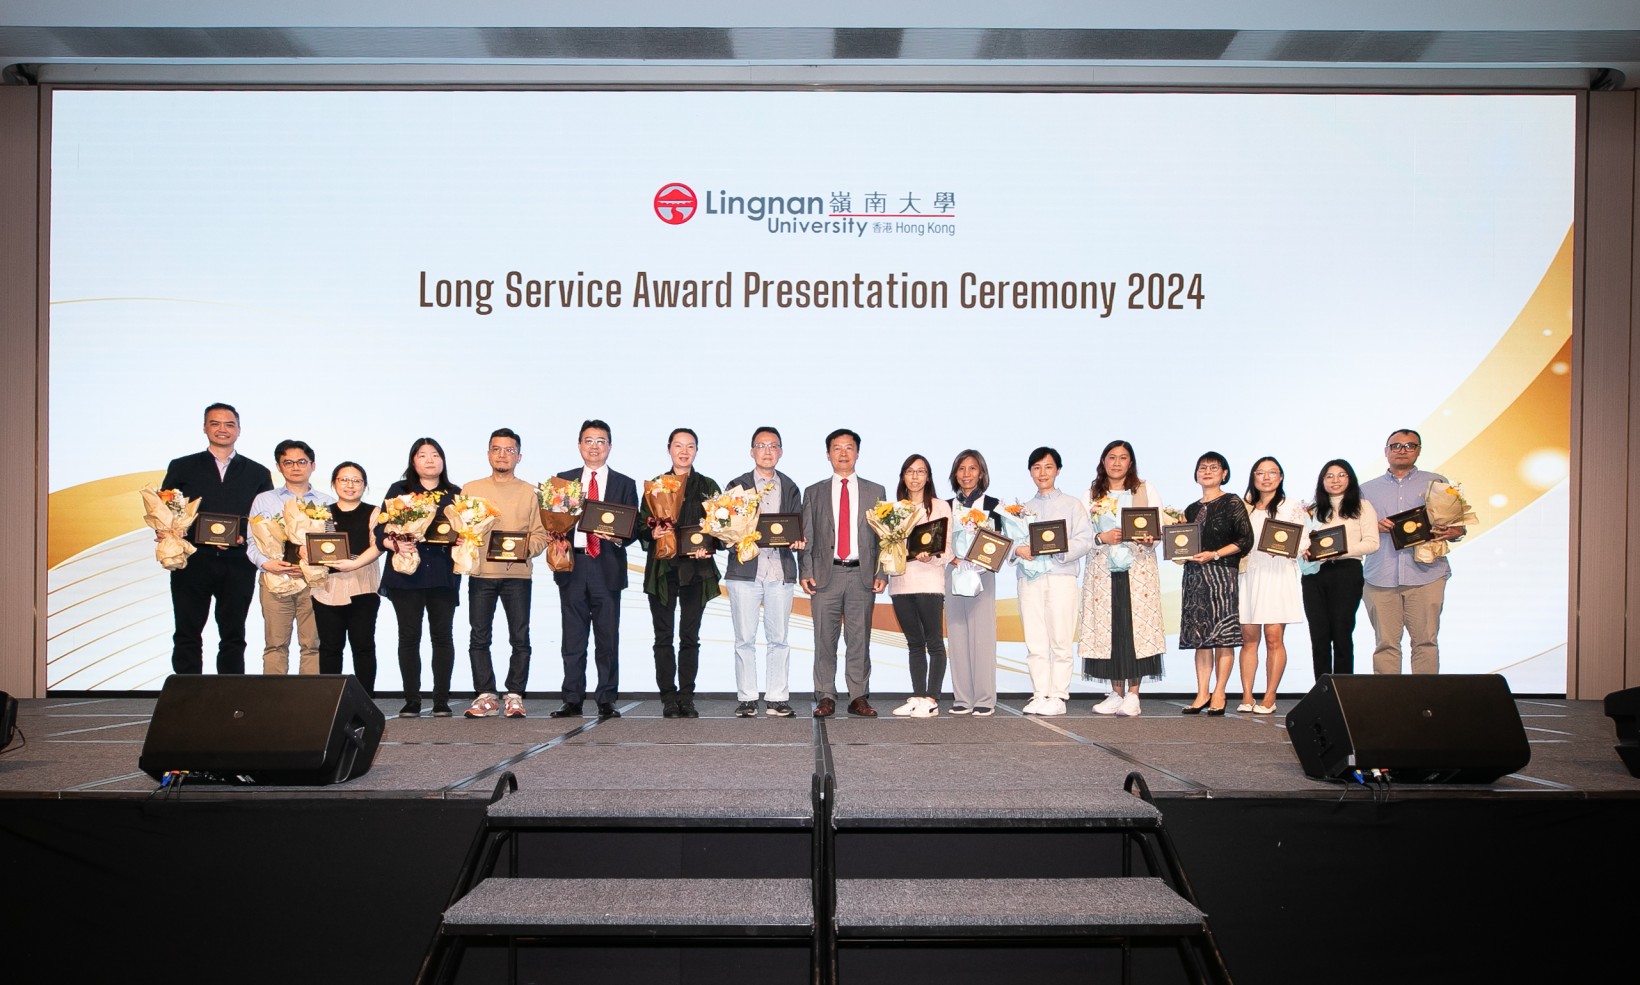 The Long Service Awardees are recognised onstage for their prolonged dedication and contribution to the Lingnan community in the presence of President S. Joe Qin.